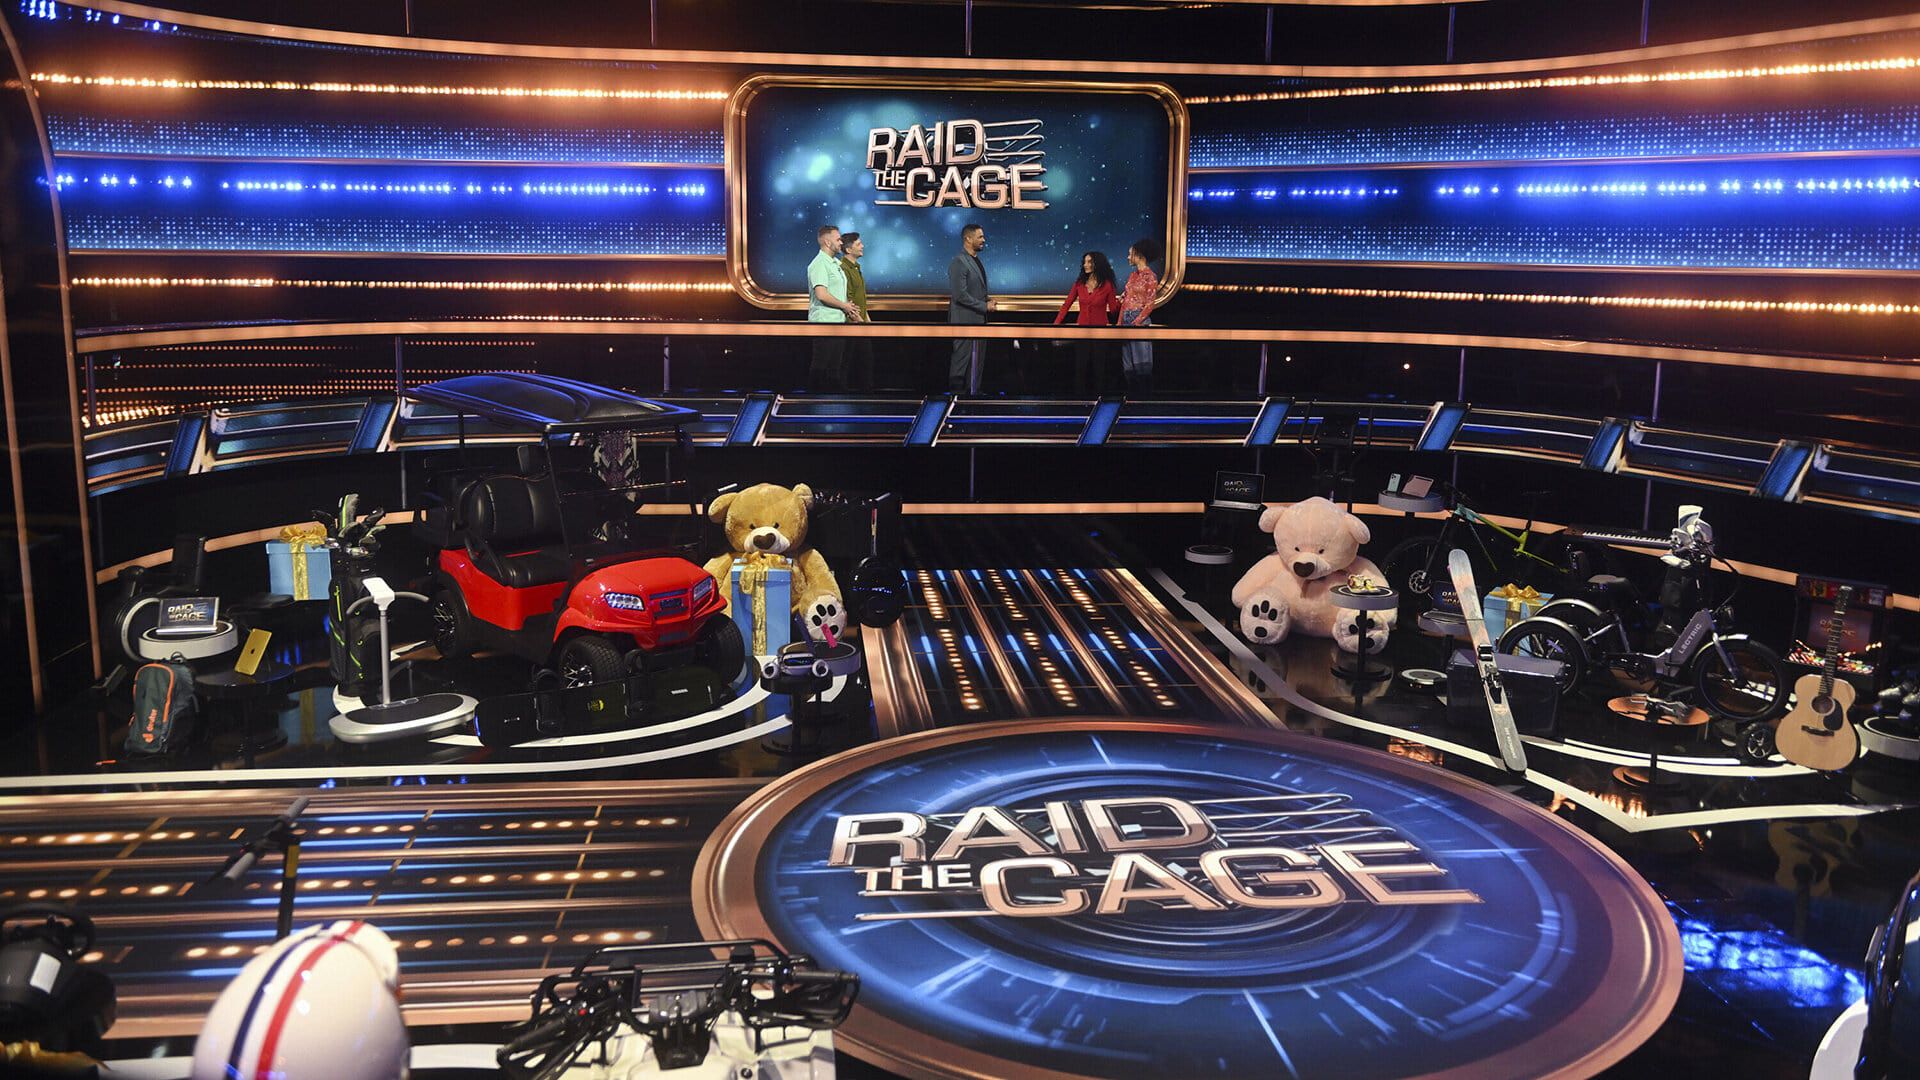 Raid the Cage background